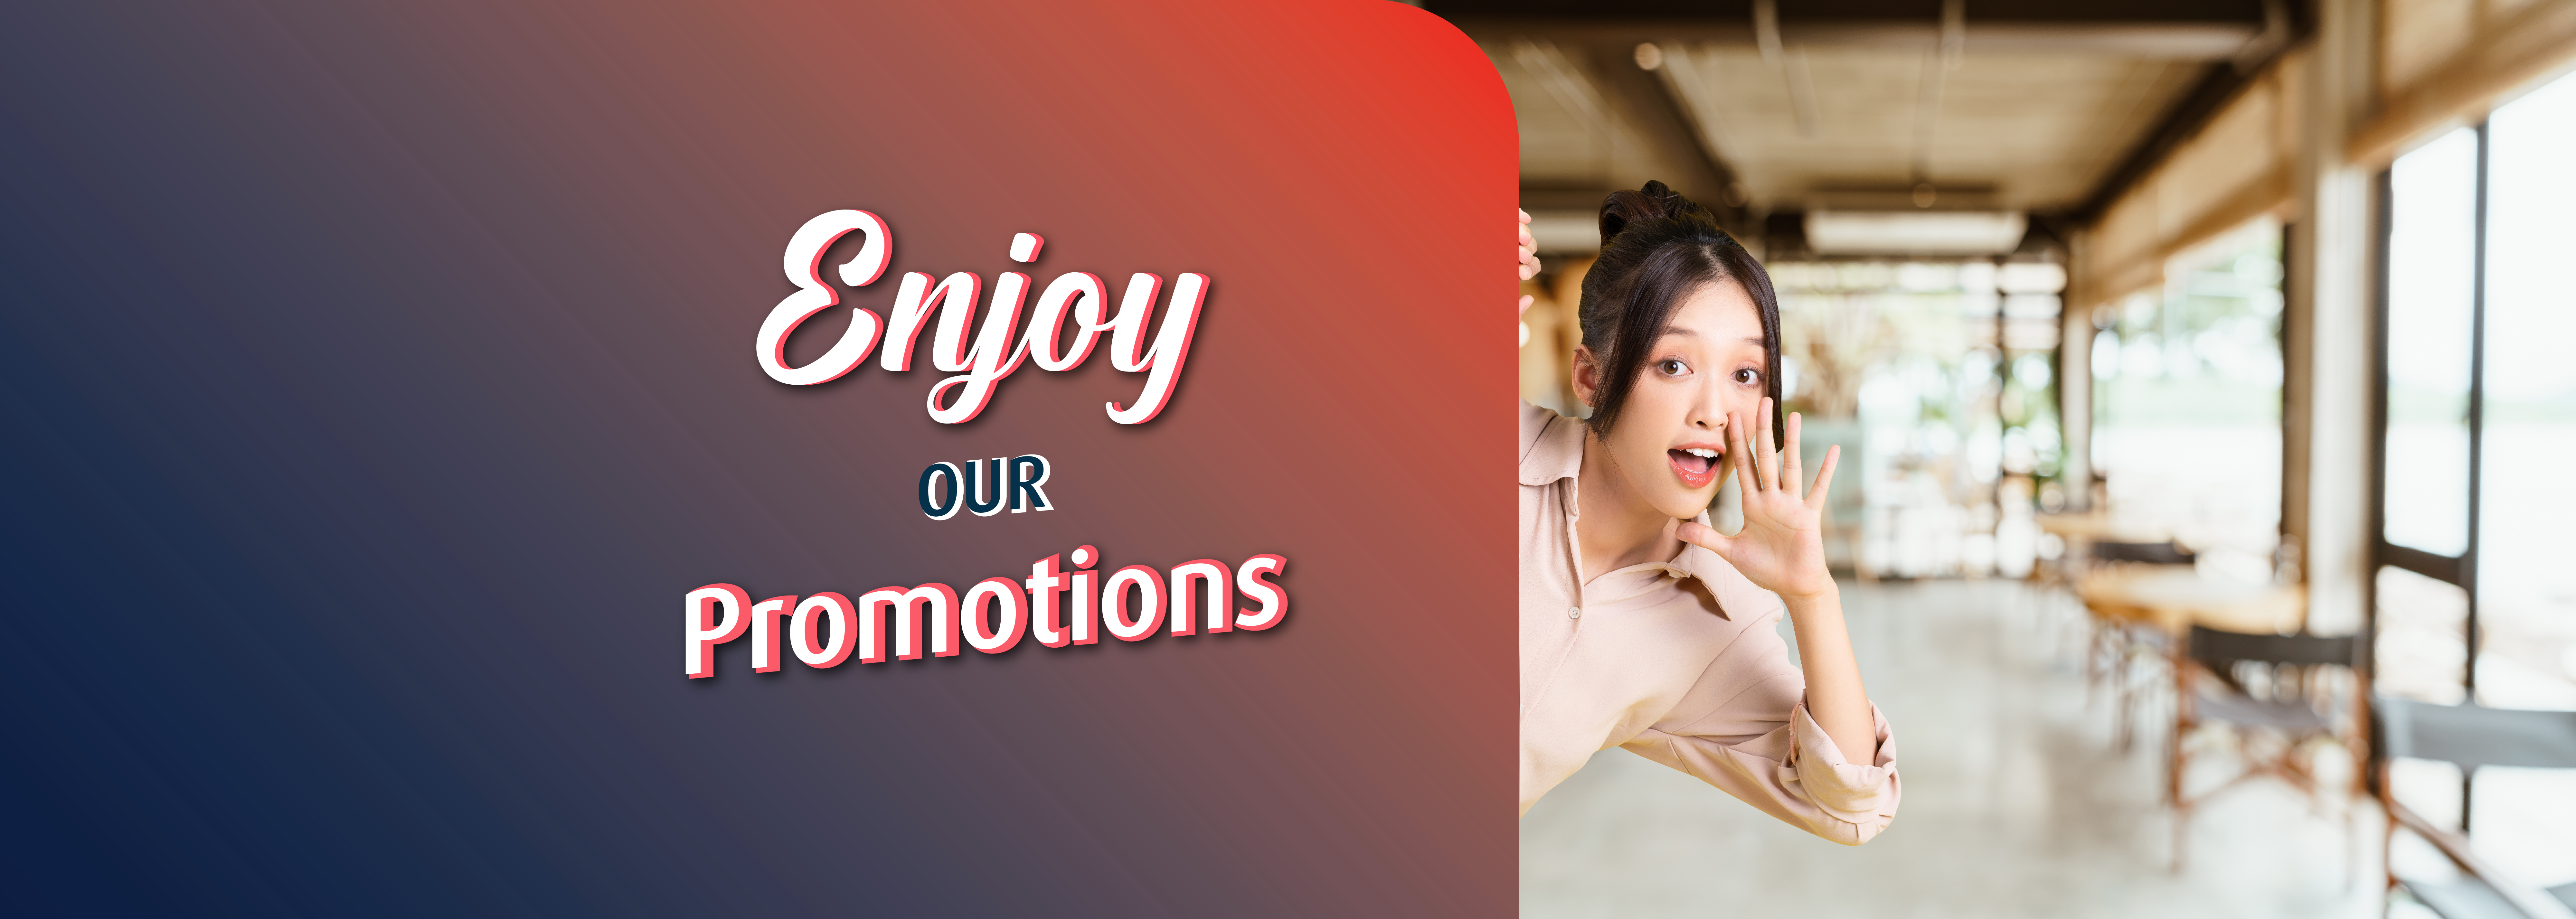 Promotion Page Banner 1920x685(1) 04